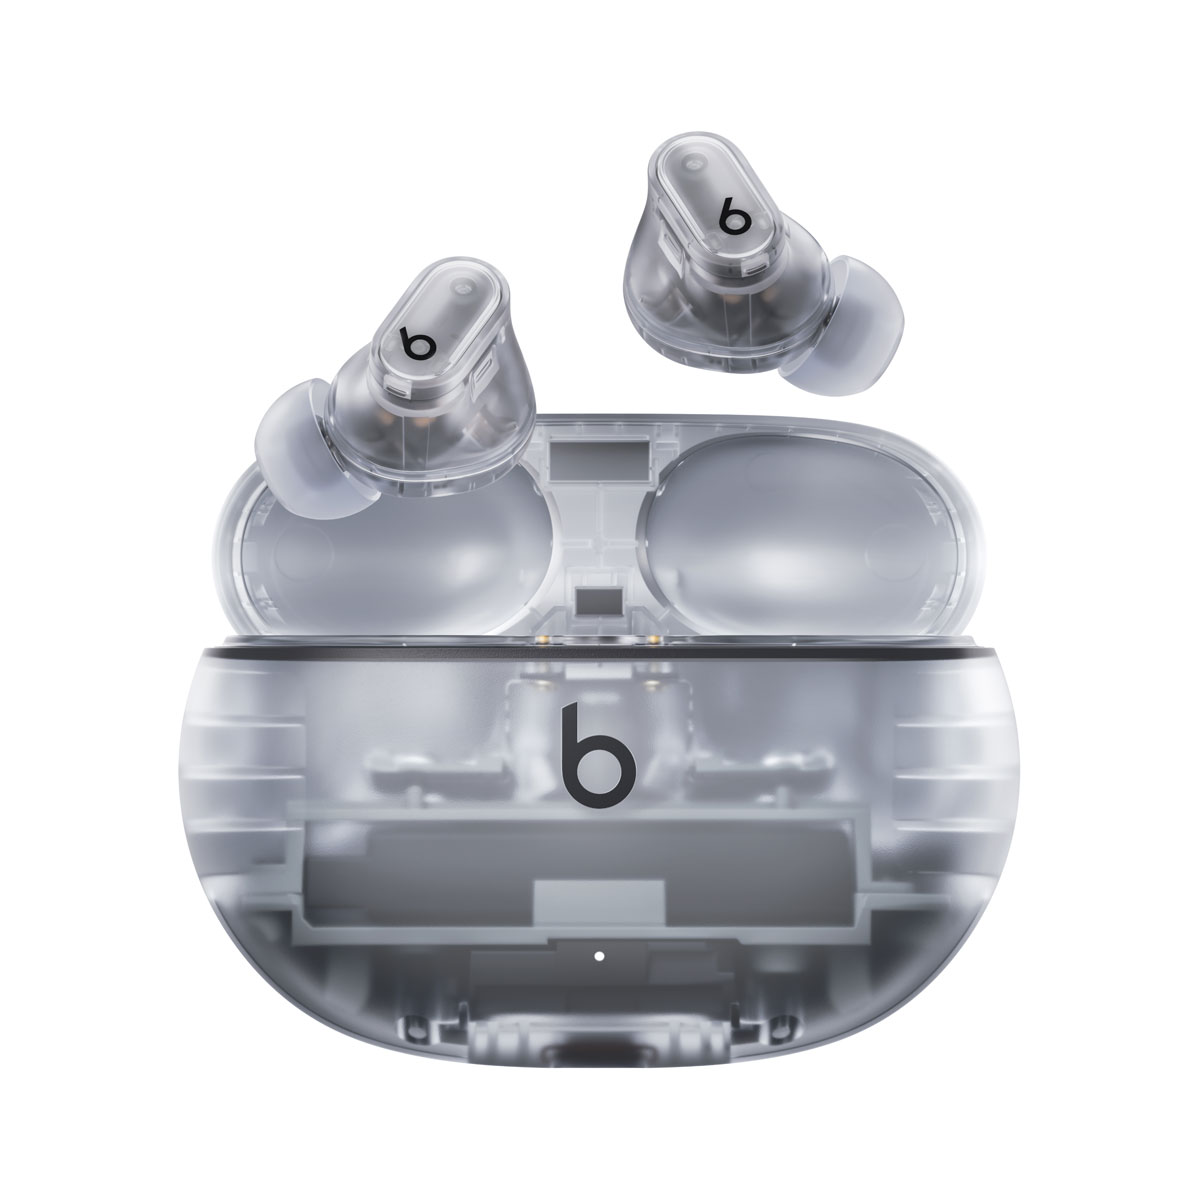 Beats Studio Buds + | True Wireless Earbuds, Noise Cancelling - Transparent